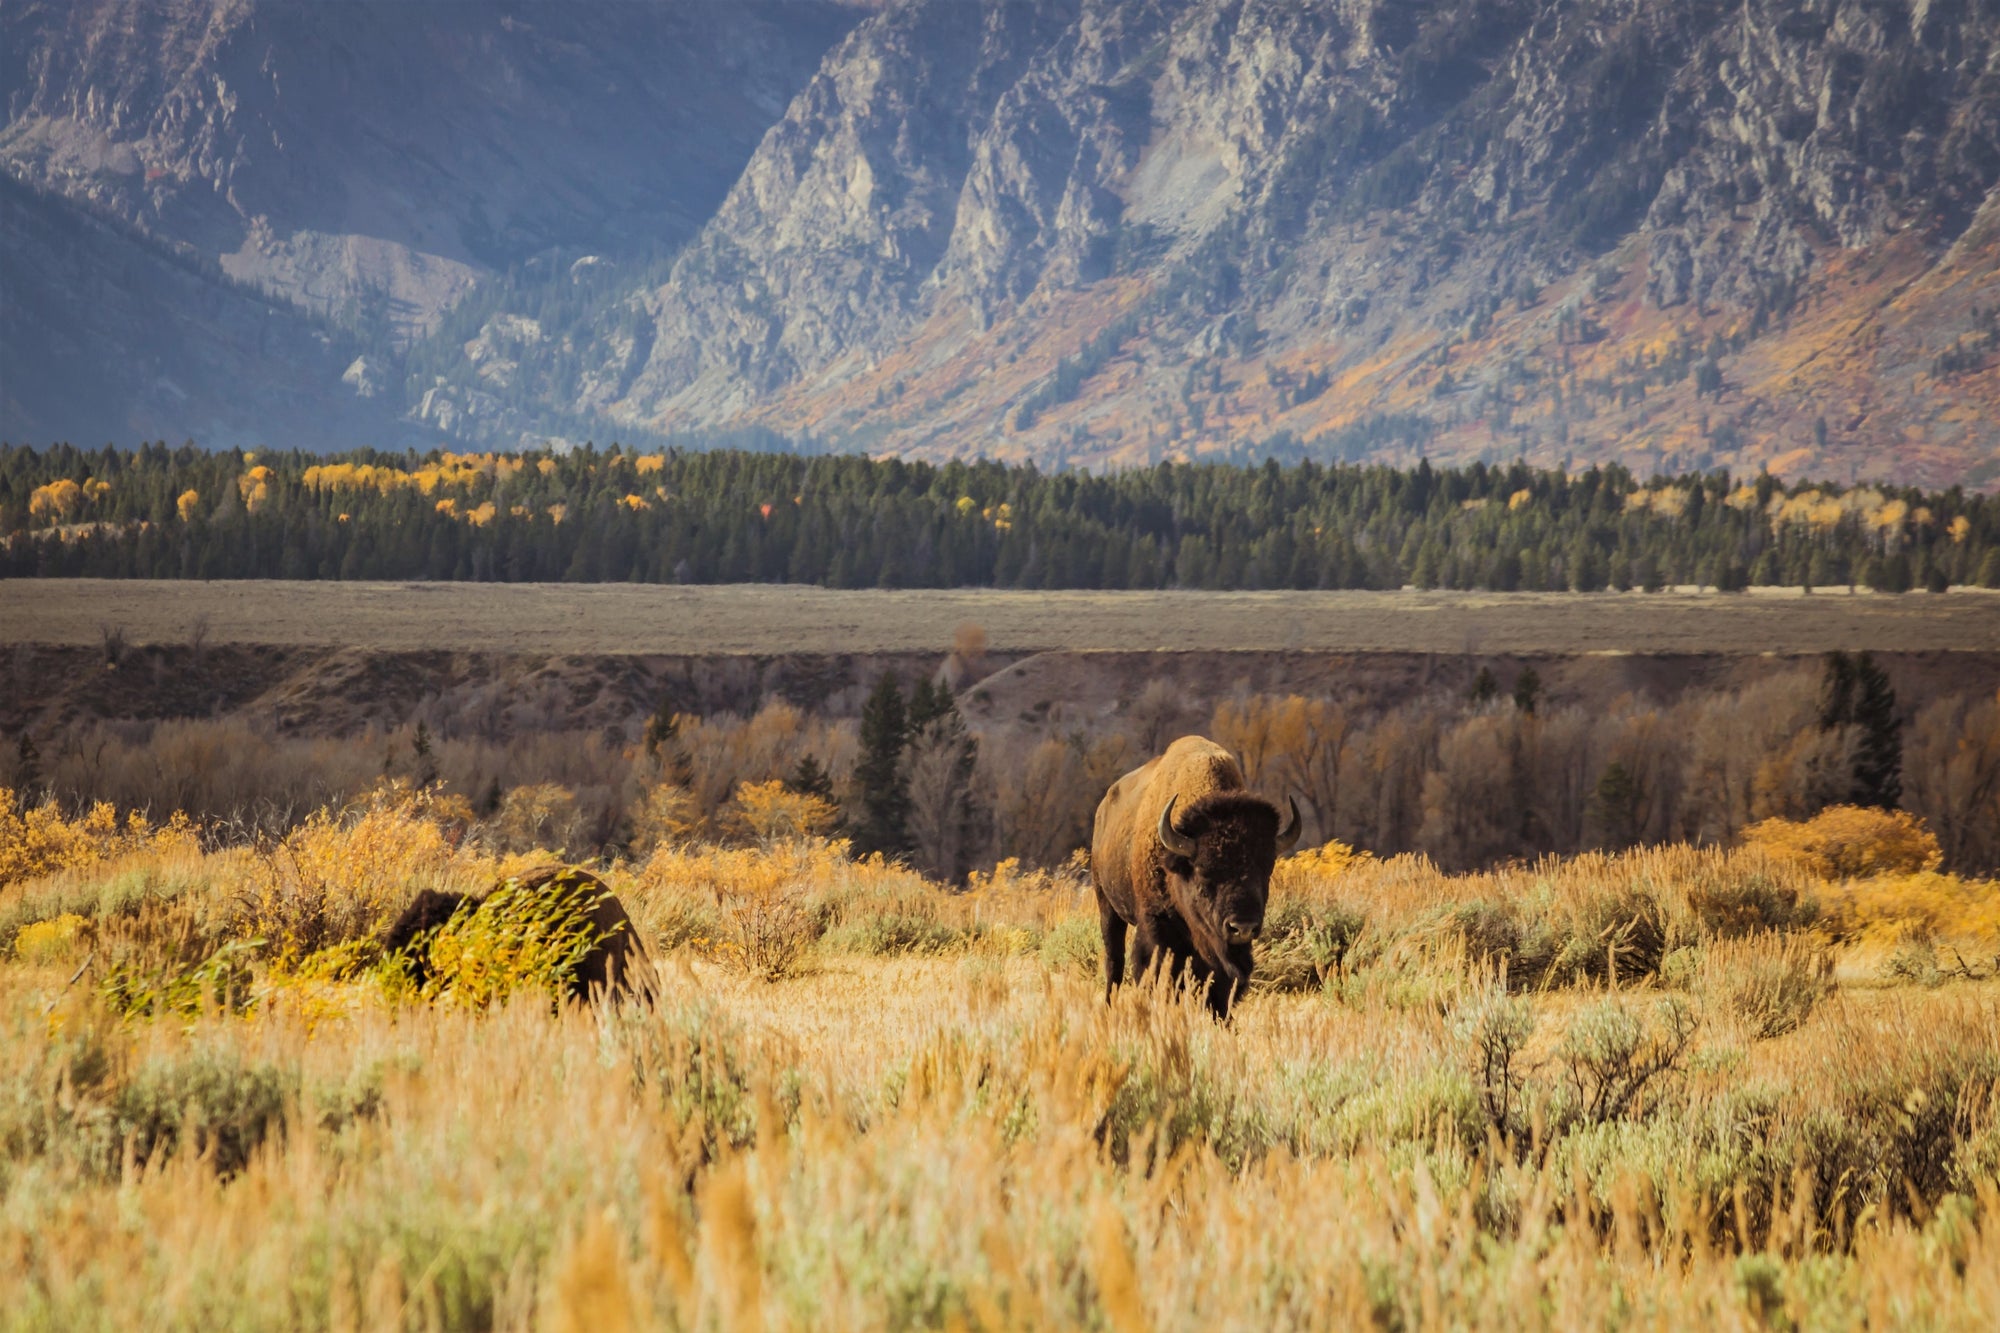 a bison walks in a golden plain with green mountains behind it